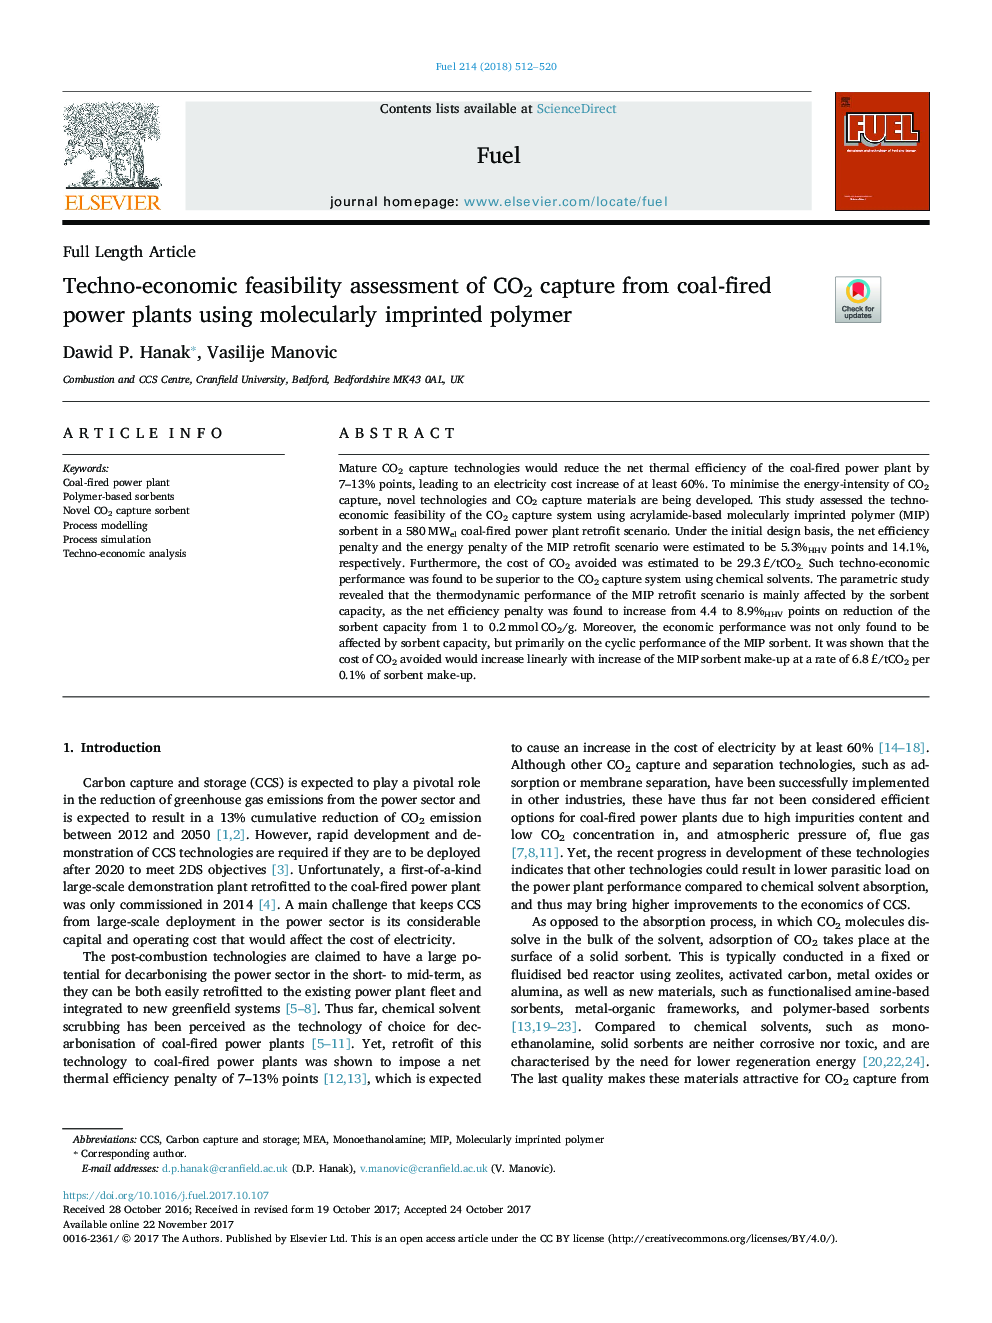 Techno-economic feasibility assessment of CO2 capture from coal-fired power plants using molecularly imprinted polymer